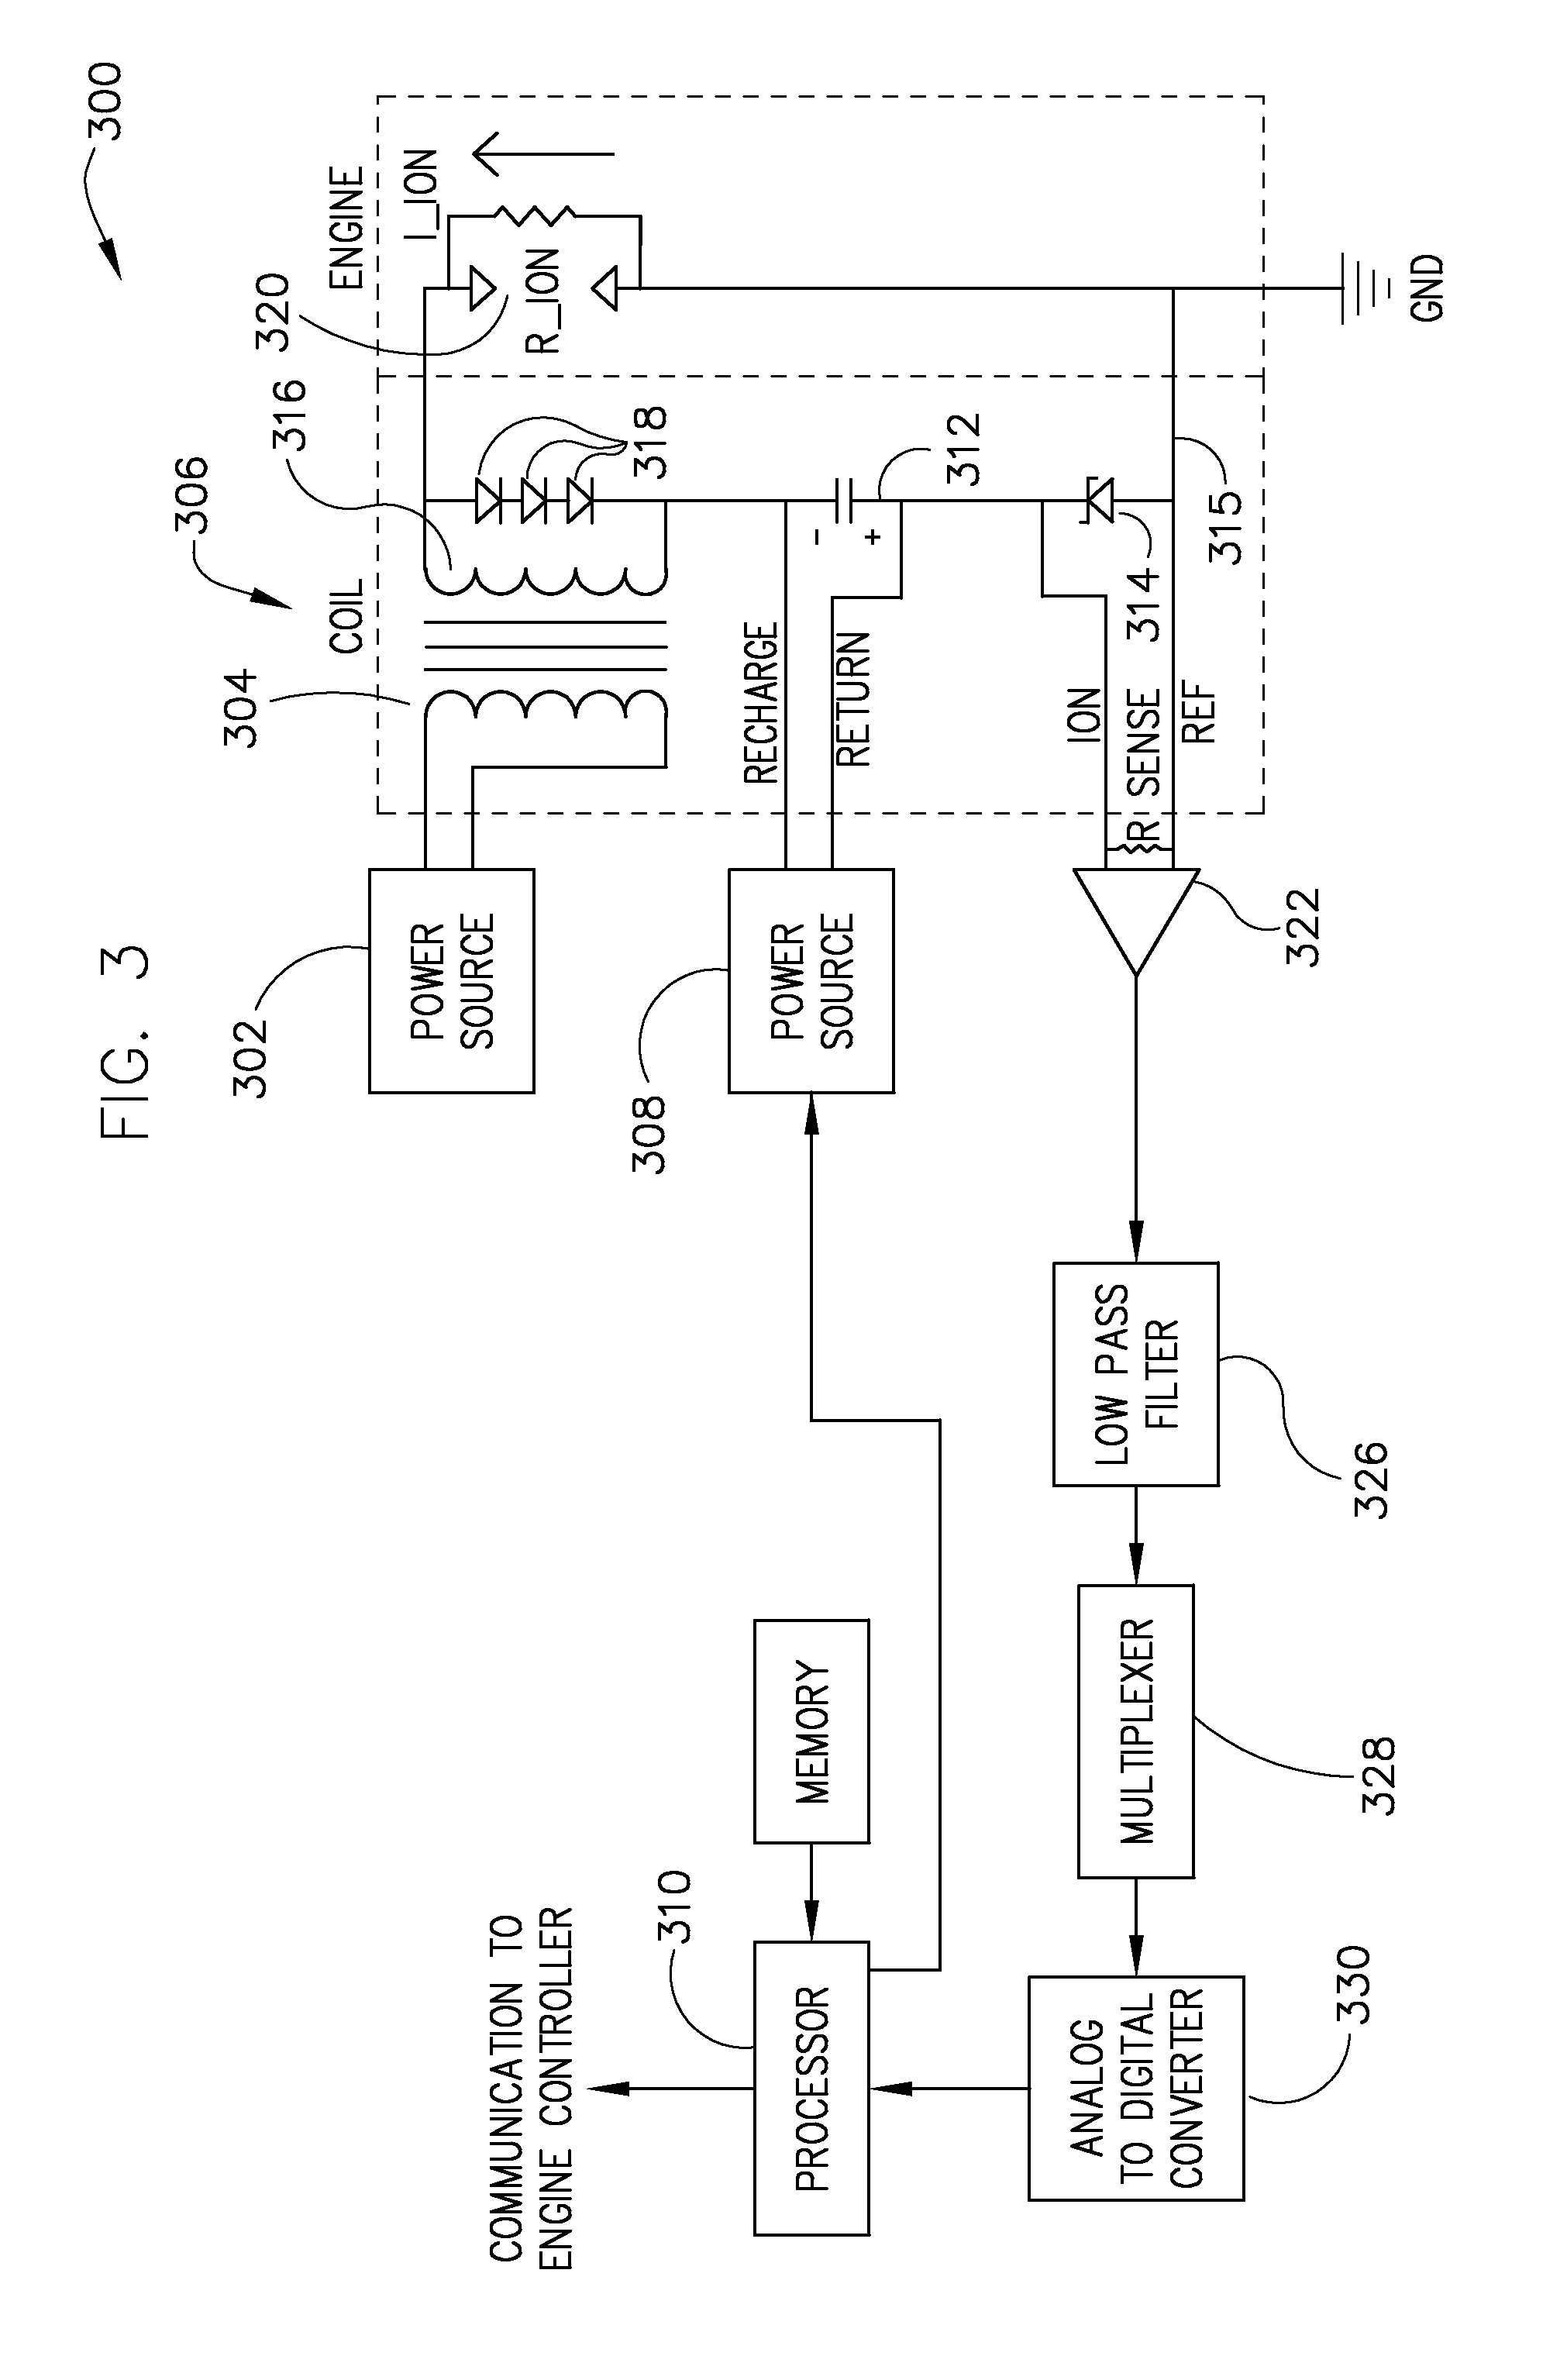 Method and system for closed loop combustion control of a lean-burn reciprocating engine using ionization detection